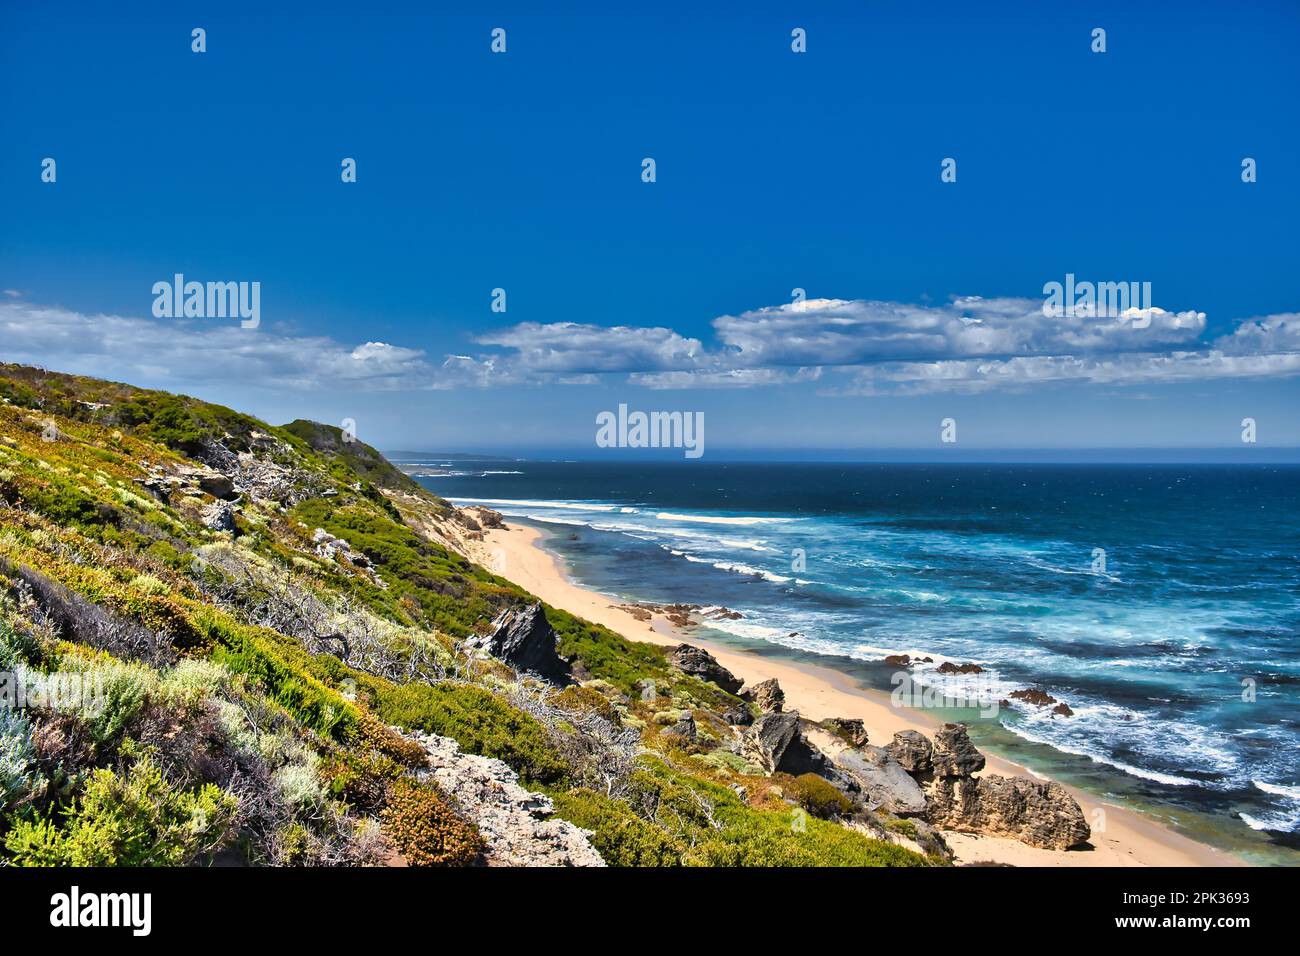 Coast with beaches and heathland along the Cape to Cape Walk, from Cape Naturaliste to Cape Leeuwin, in the Margaret River region of Western Australia Stock Photo